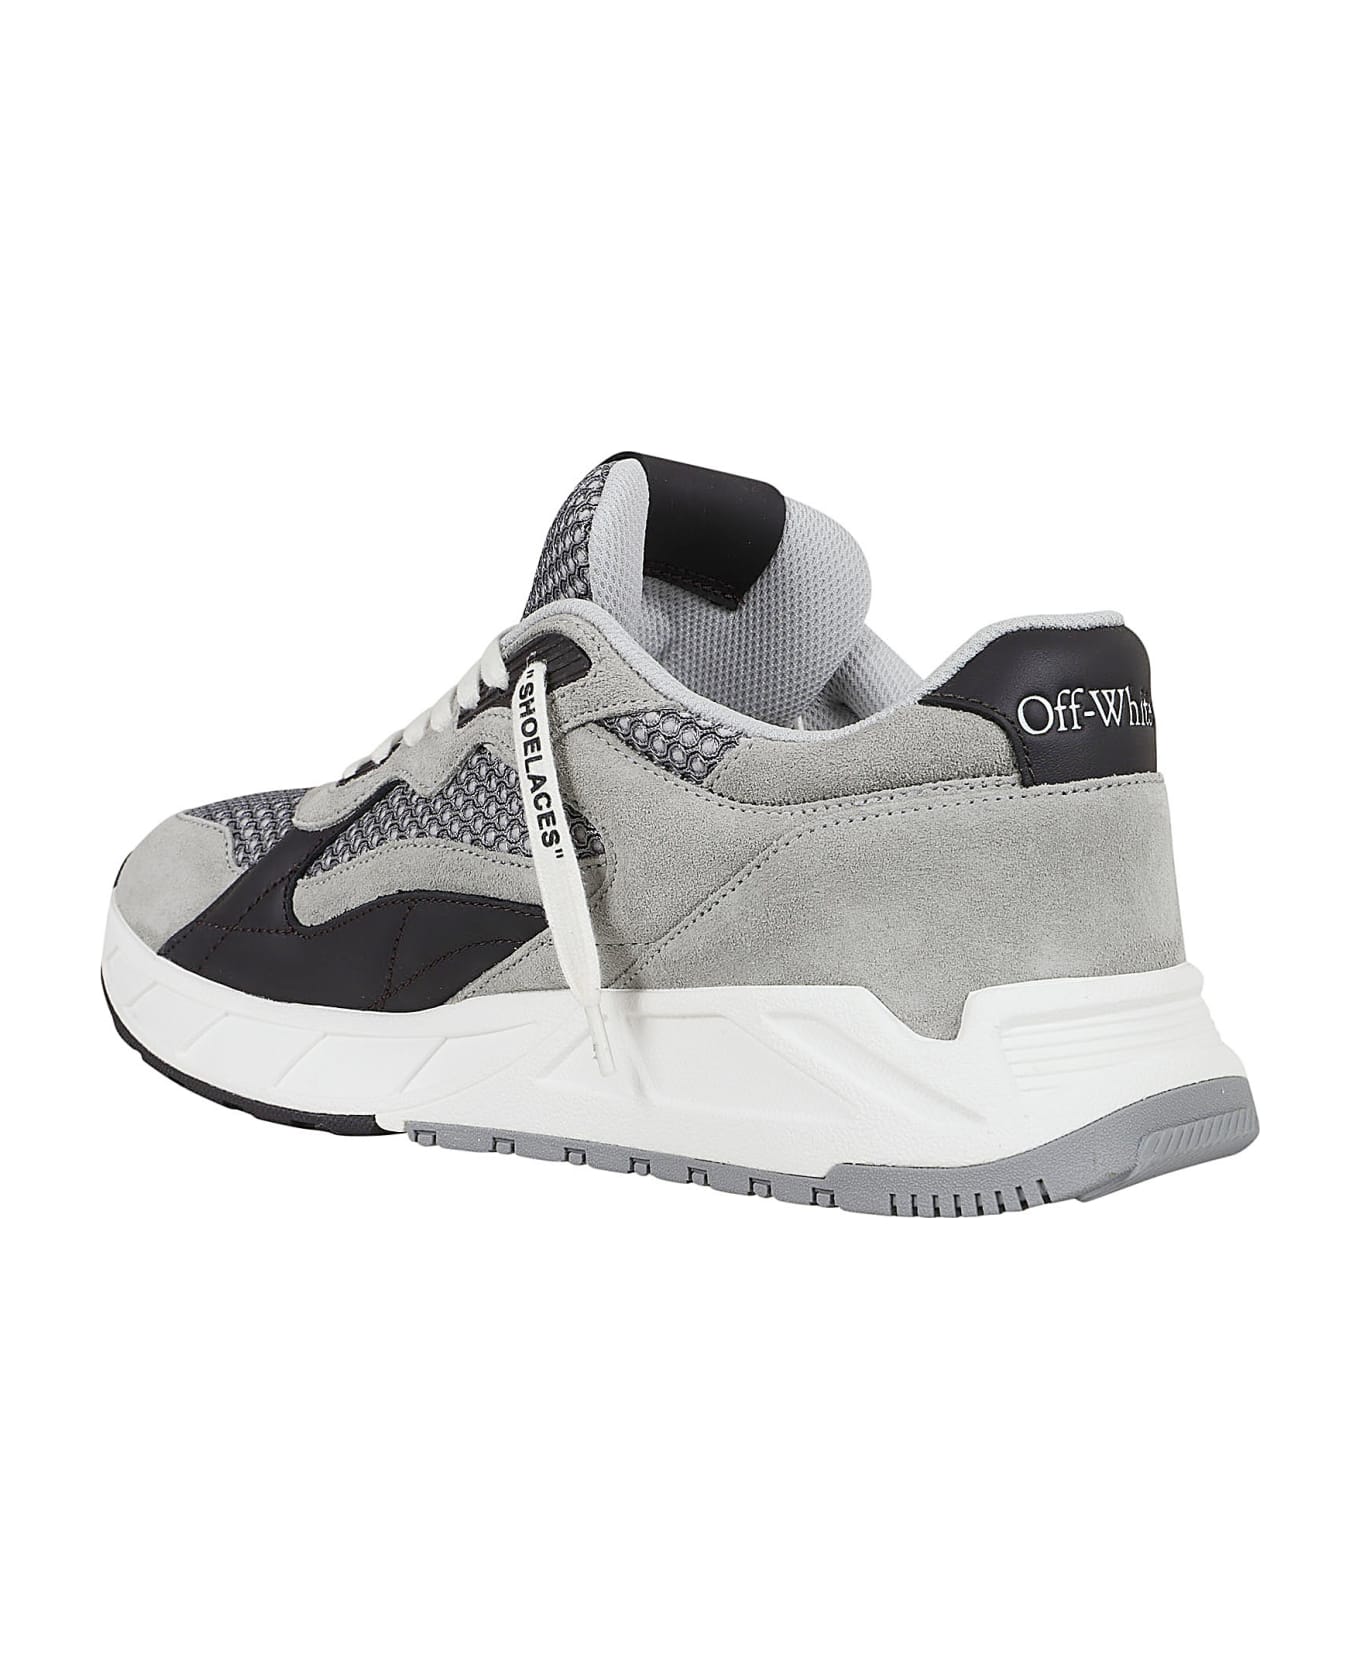 Off-White Kick Off Sneakers - Grey Anthracite